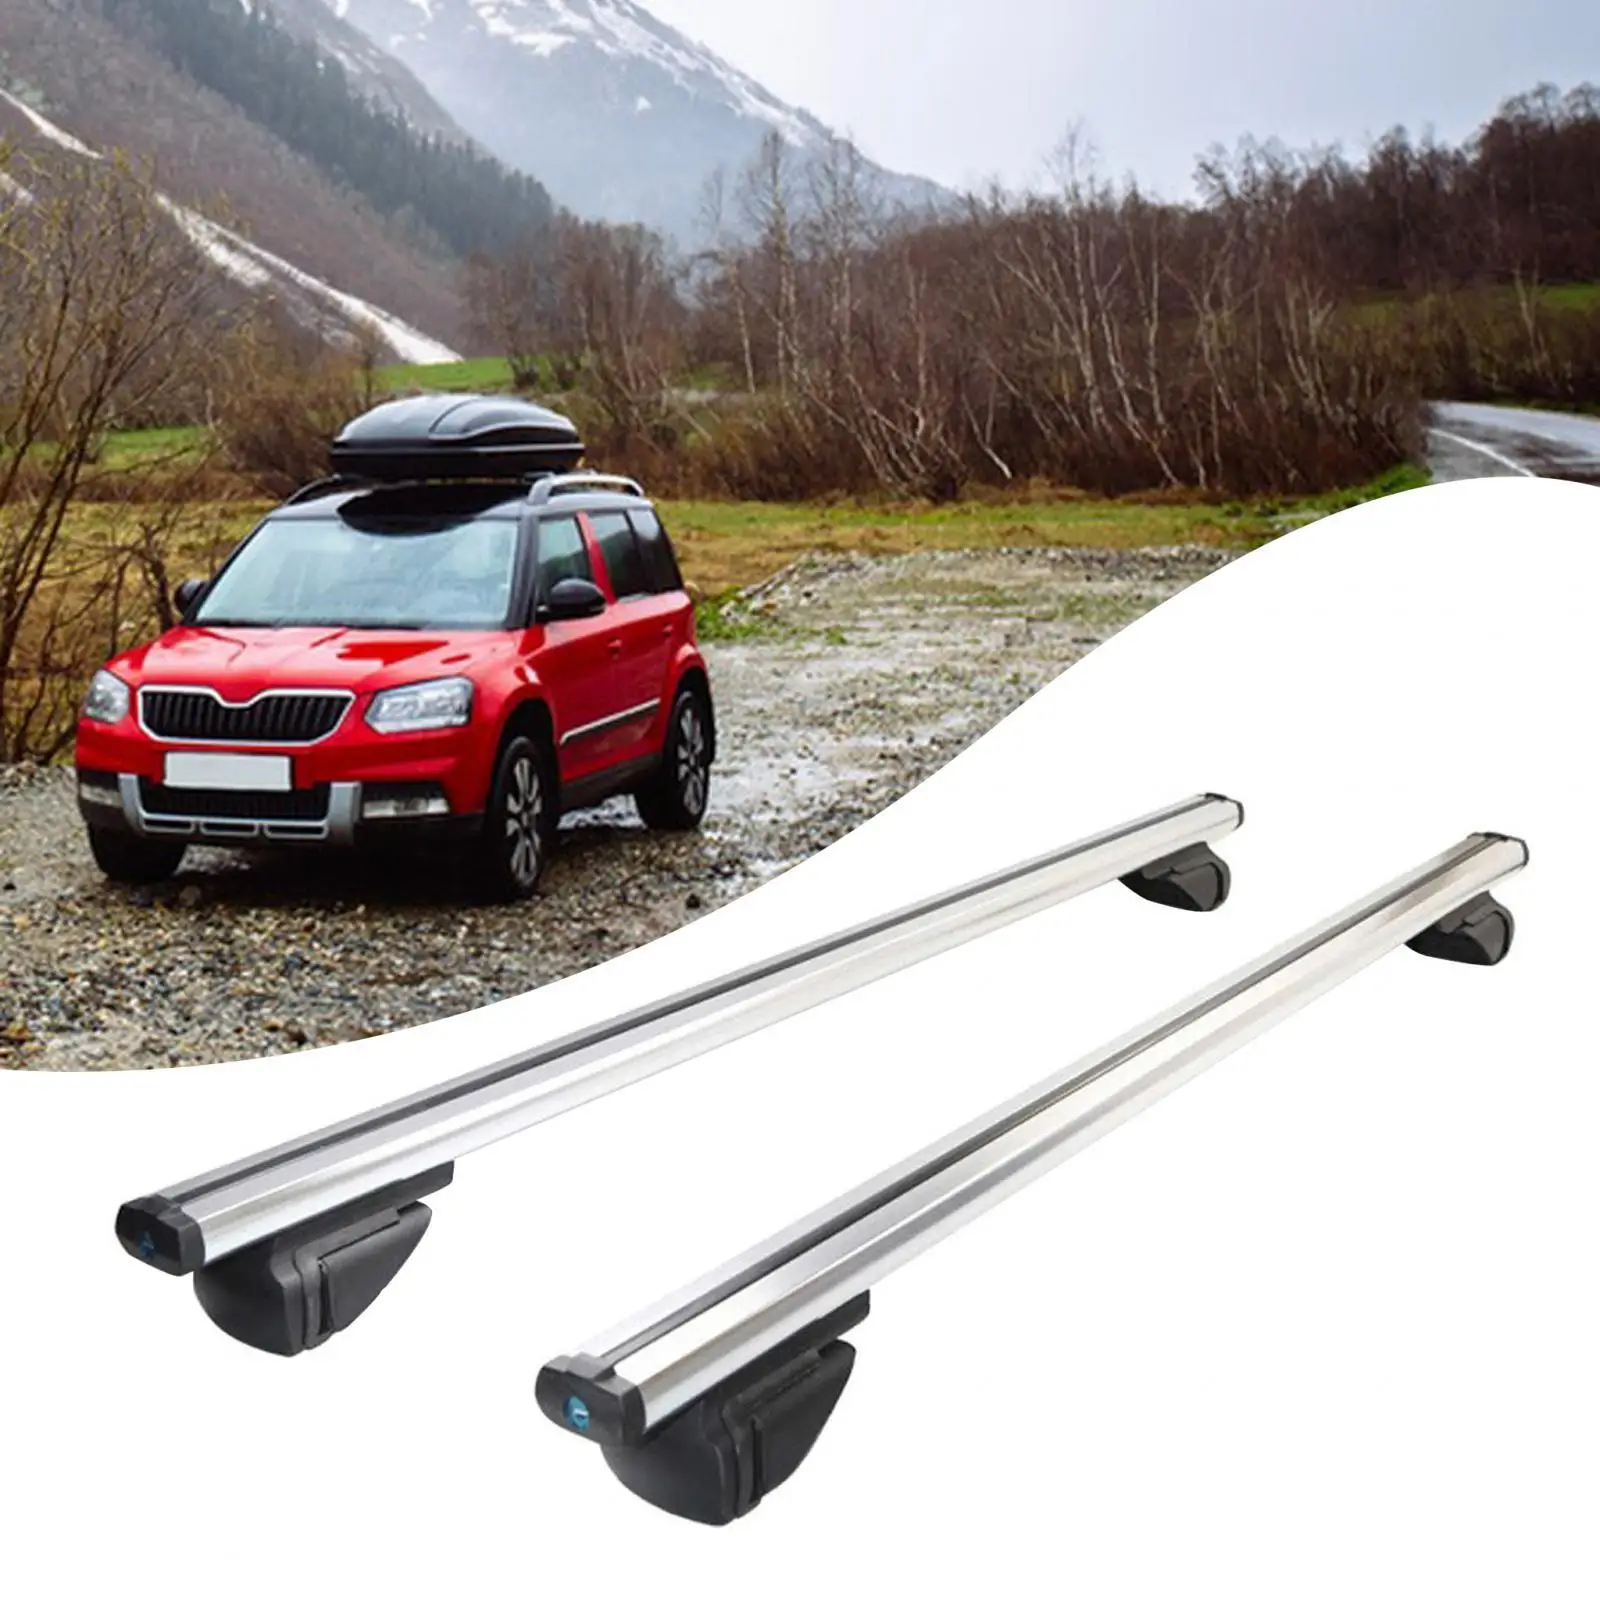 Car Roof Racks Cross Bars Easy to Install with Locks Heavy Duty Crossbars Top Roof Crossbar Holder for Most Car Automobiles